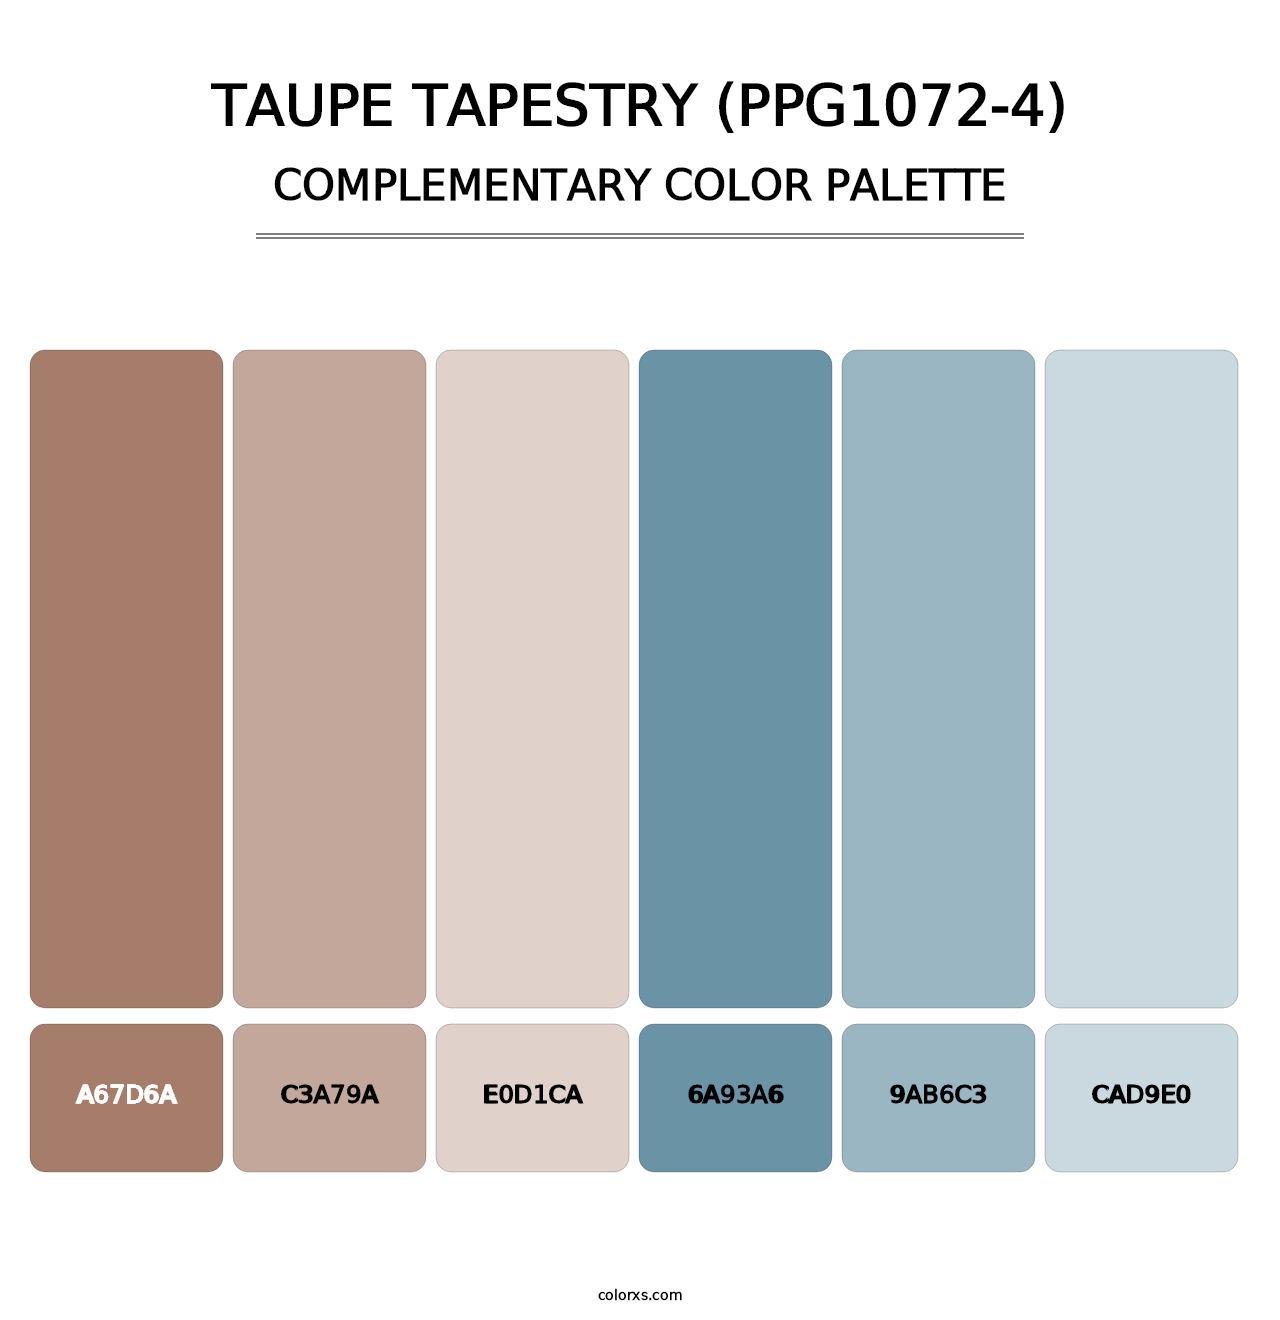 Taupe Tapestry (PPG1072-4) - Complementary Color Palette